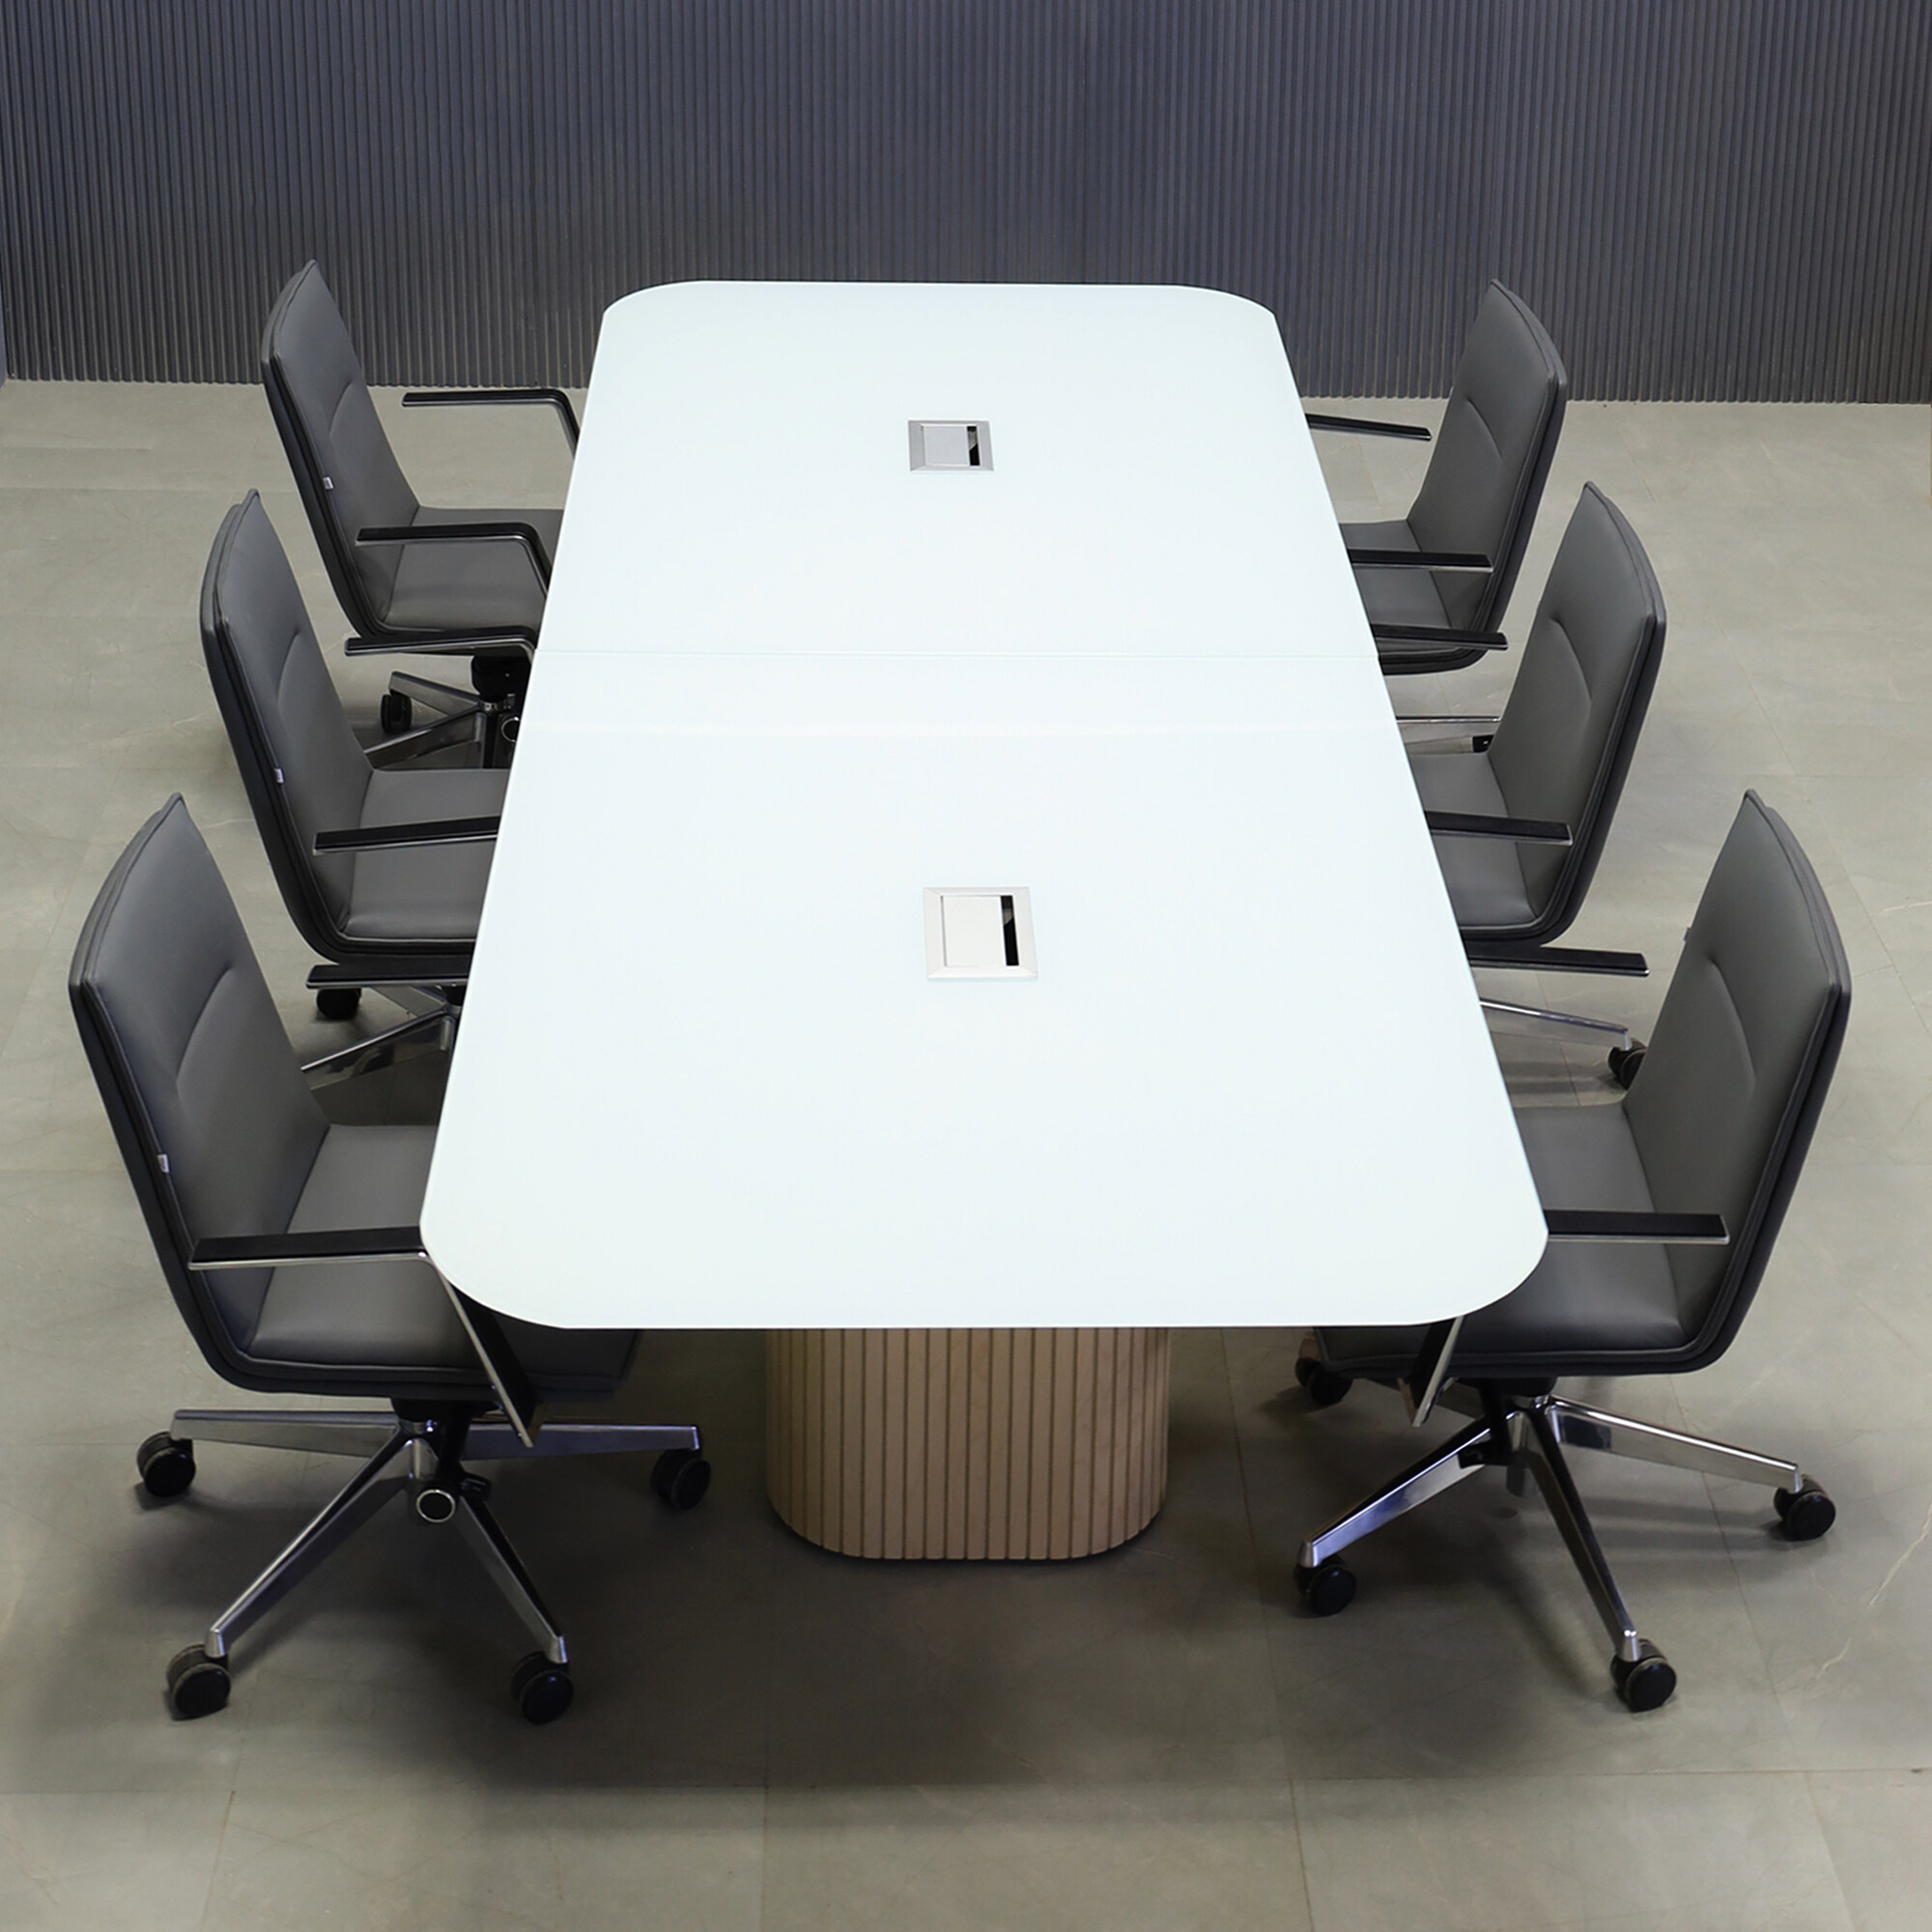 120-inch Omaha Rectangular Conference Table in 1/2